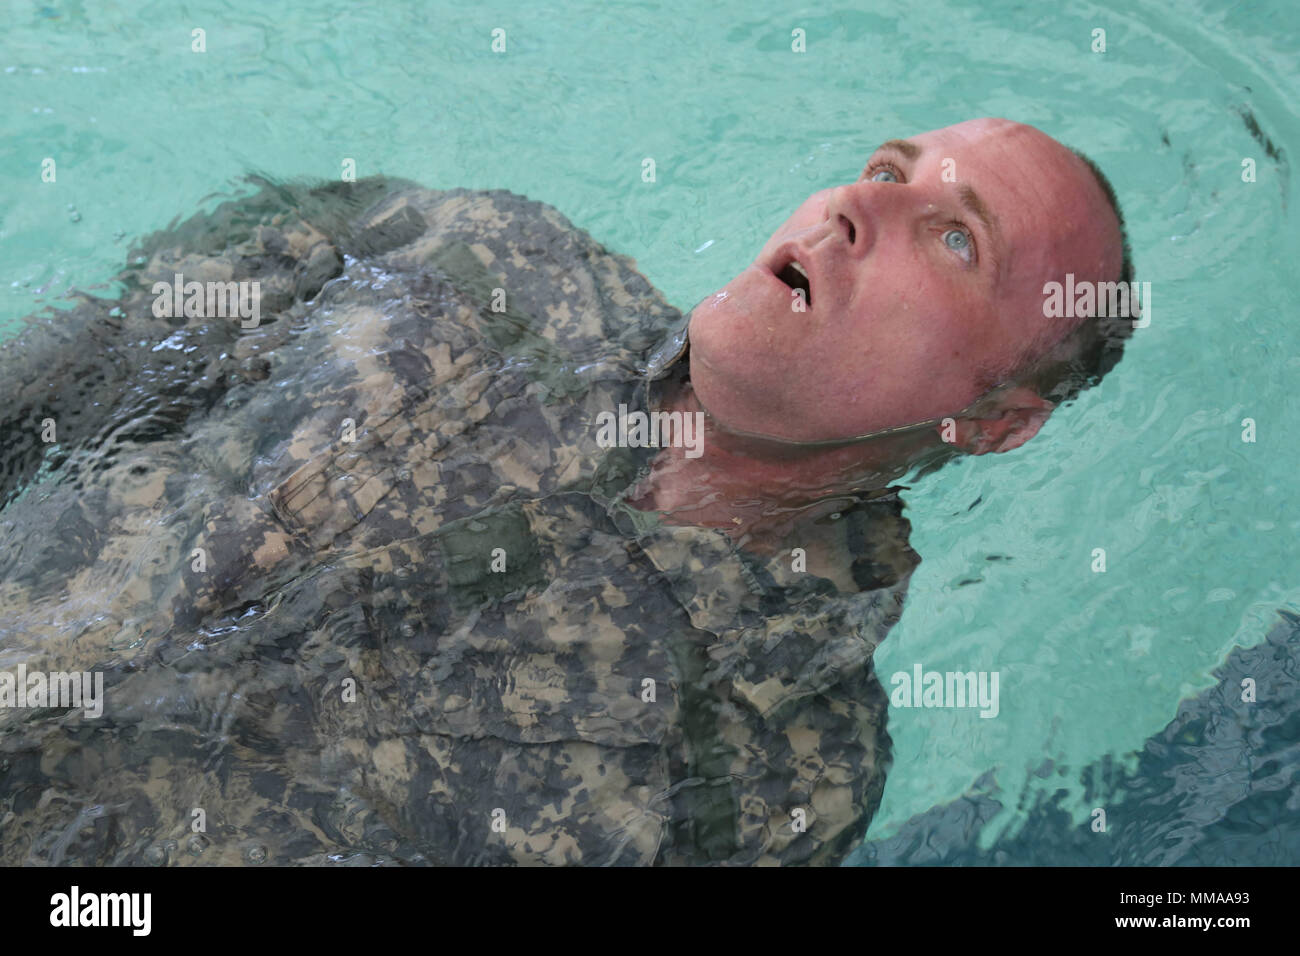 U.S. Army Staff Sgt. Eric Sullivan, assigned to the Blanchfield Army Community Hospital, swims backwards during the water survival portion of the 2017 Best Medic Competition at Fort Bragg, N.C., Sept. 19, 2017. The competition tested the physical and mental toughness, as well as the technical competence, of each medic to identify the team moving forward to represent the region at the next level of the competition.  (U.S. Army photo by Pfc. Meleesa Gutierrez) Stock Photo